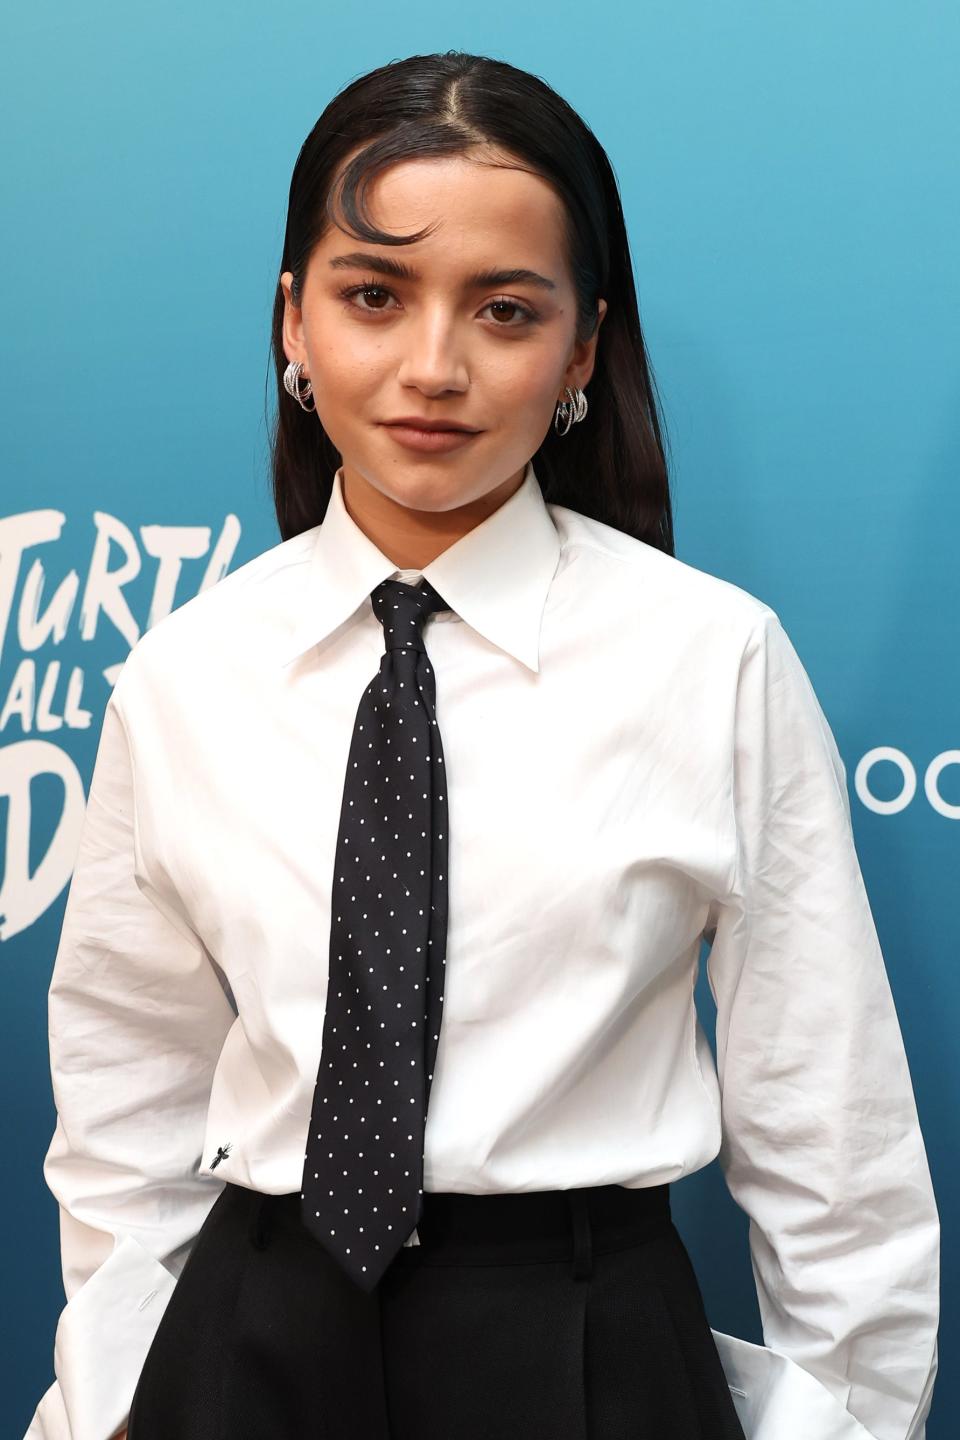 Isabela Merced in white shirt, black tie, and trousers at 'Turtles All the Way Down' event